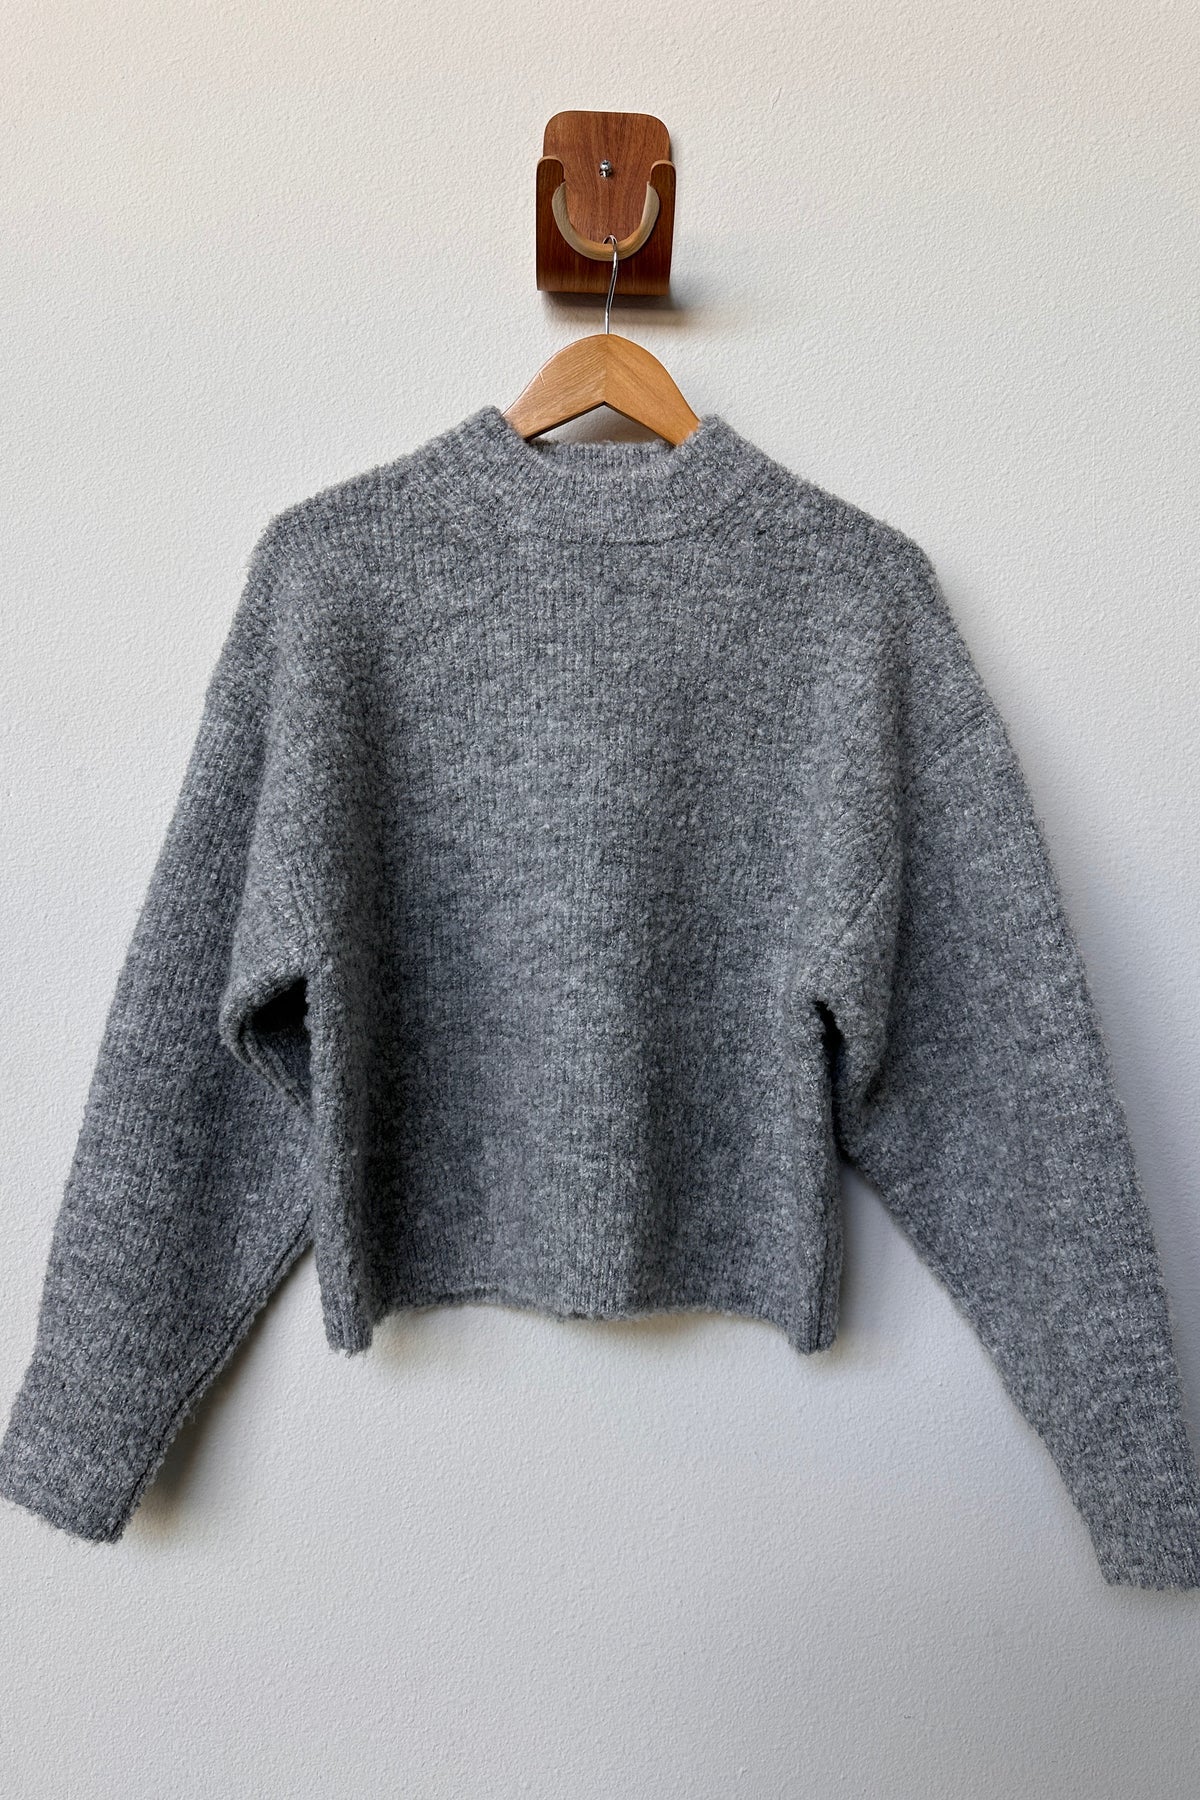 Le Bon Shoppe butter soft thick knit Elise pullover sweater in heather grey